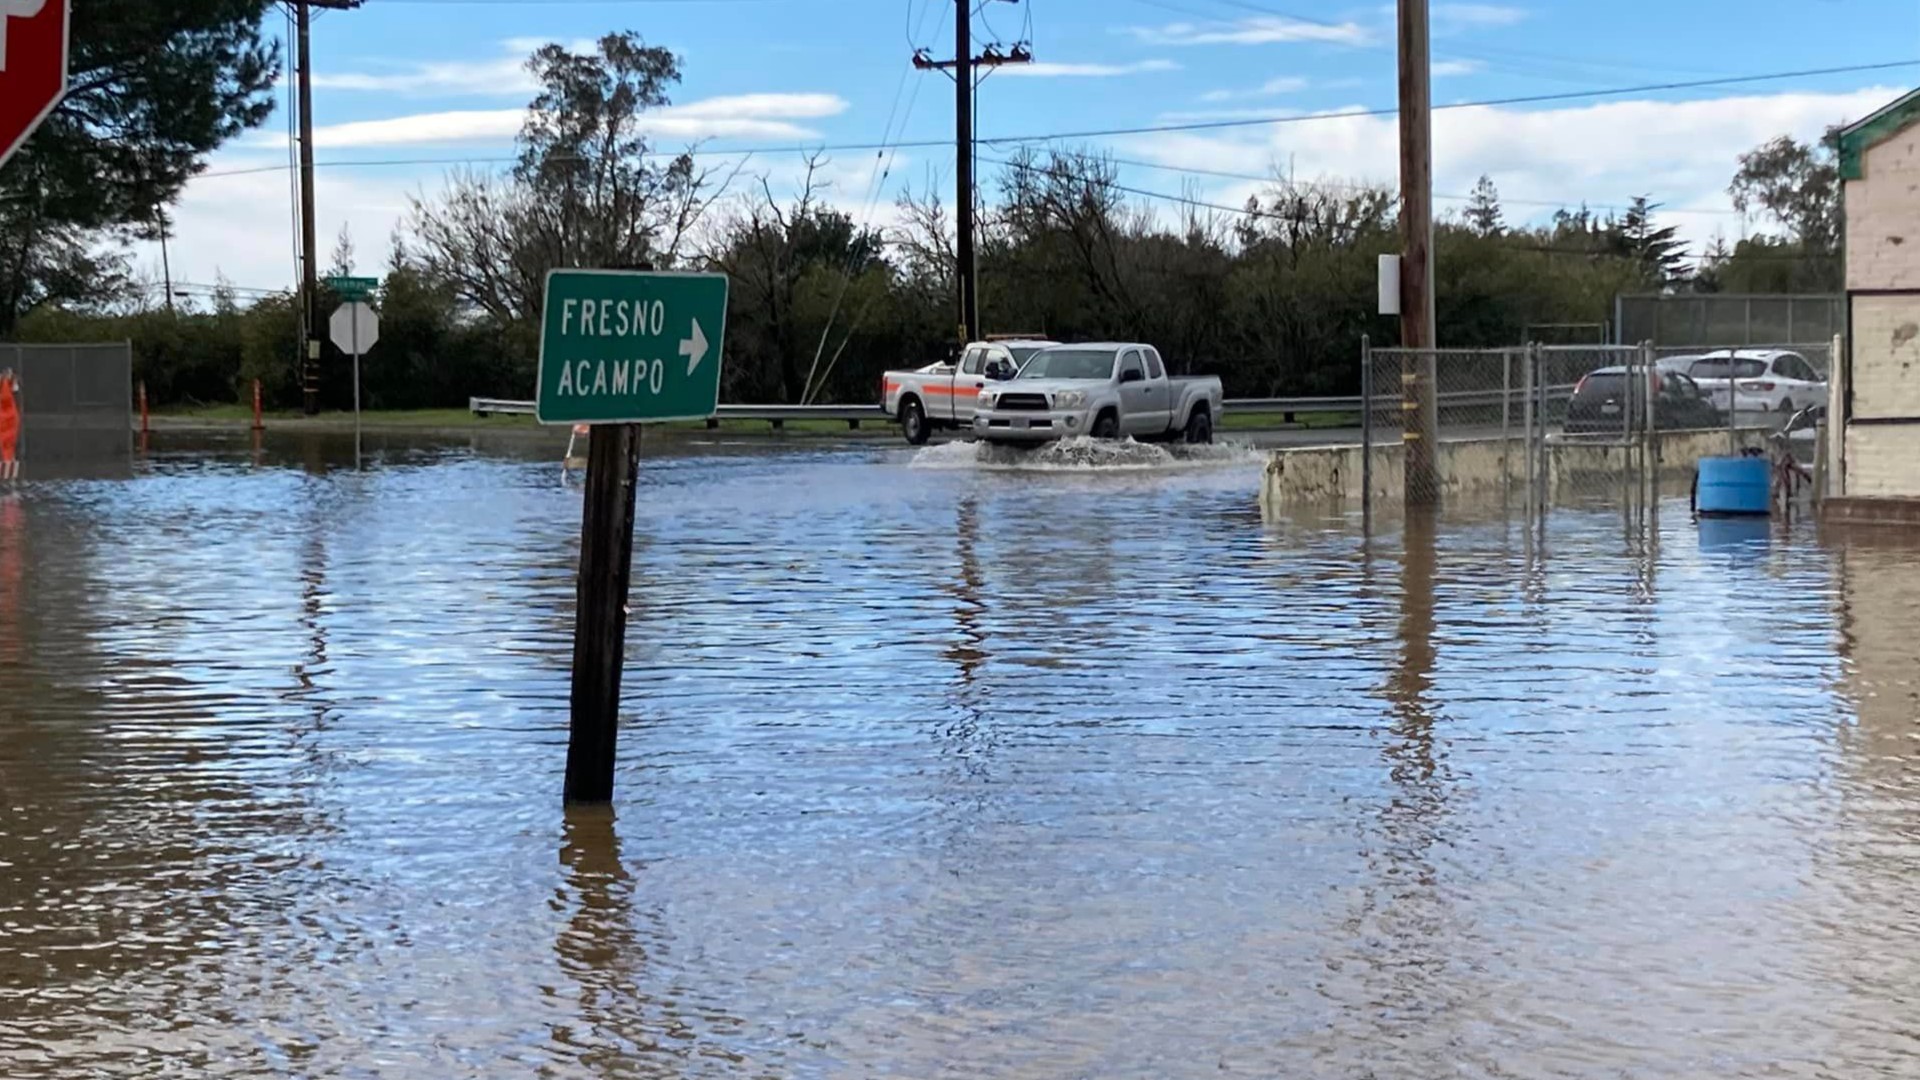 Where streets once looked more like rivers in Acampo, life has returned to parts of San Joaquin County evacuated during January's winter storms.